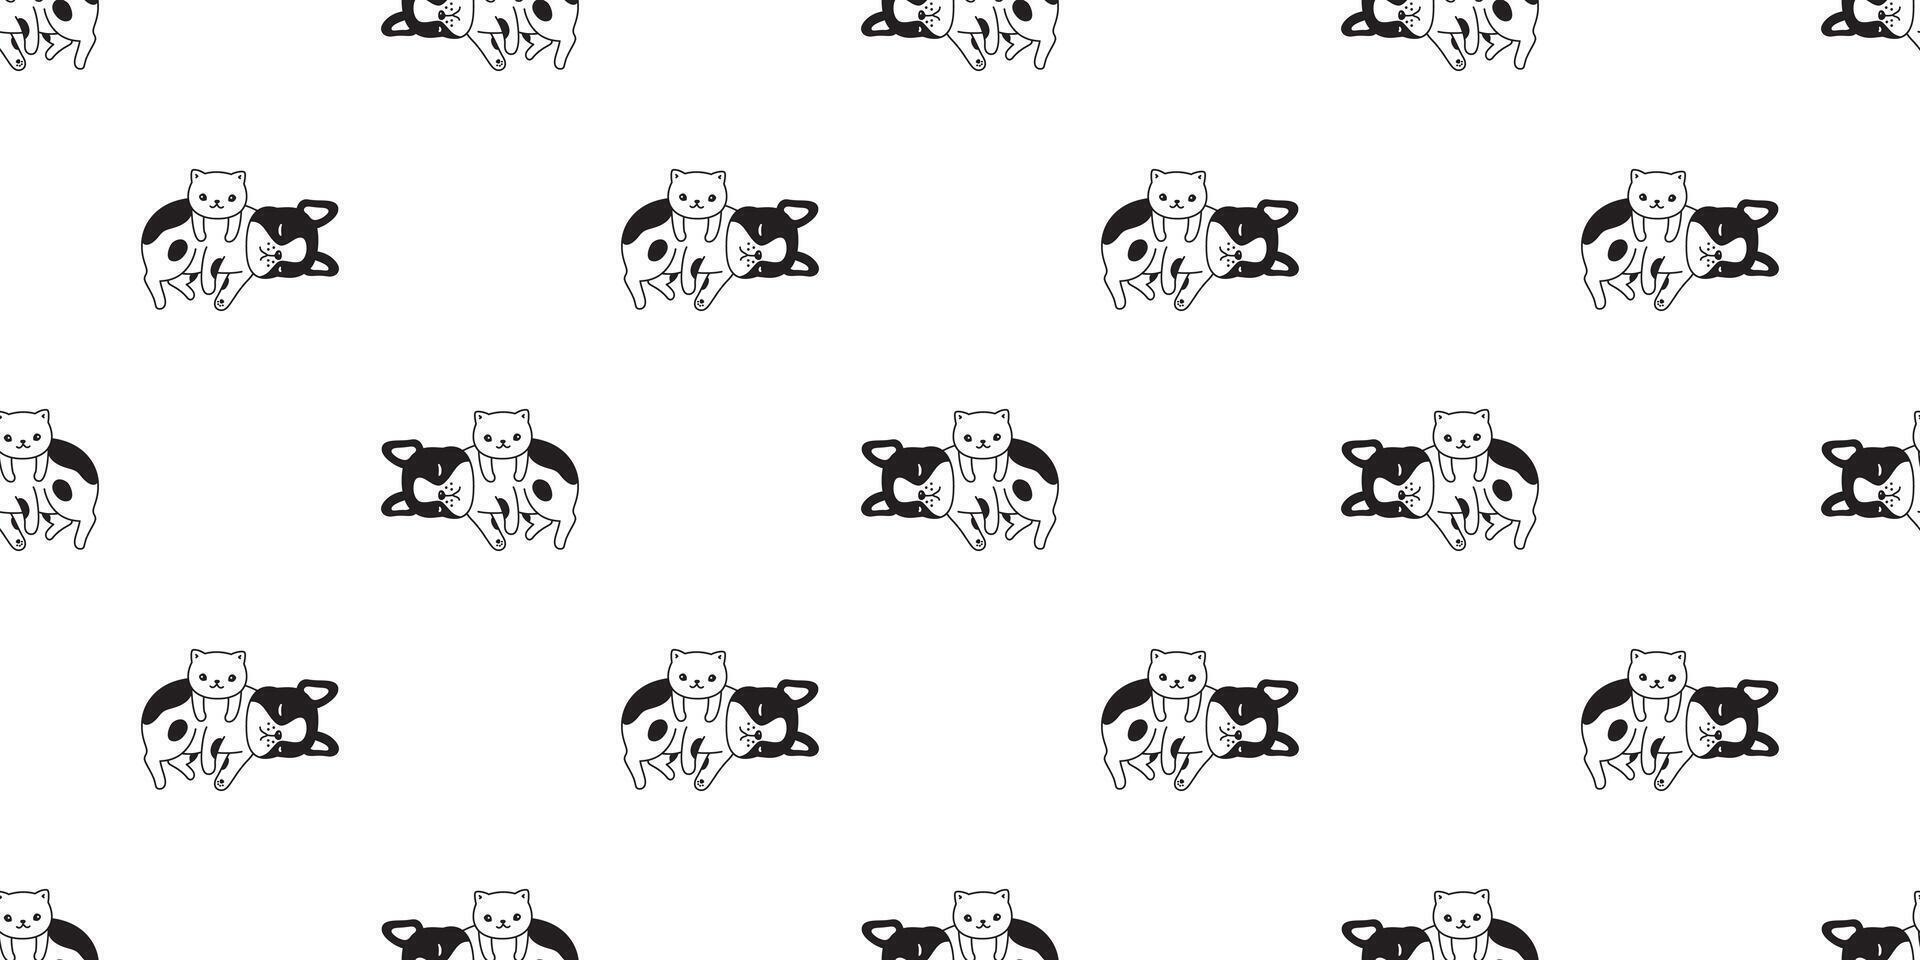 dog cat french bulldog seamless pattern kitten calico sleeping cartoon tile background repeat wallpaper scarf isolated illustration doodle design vector